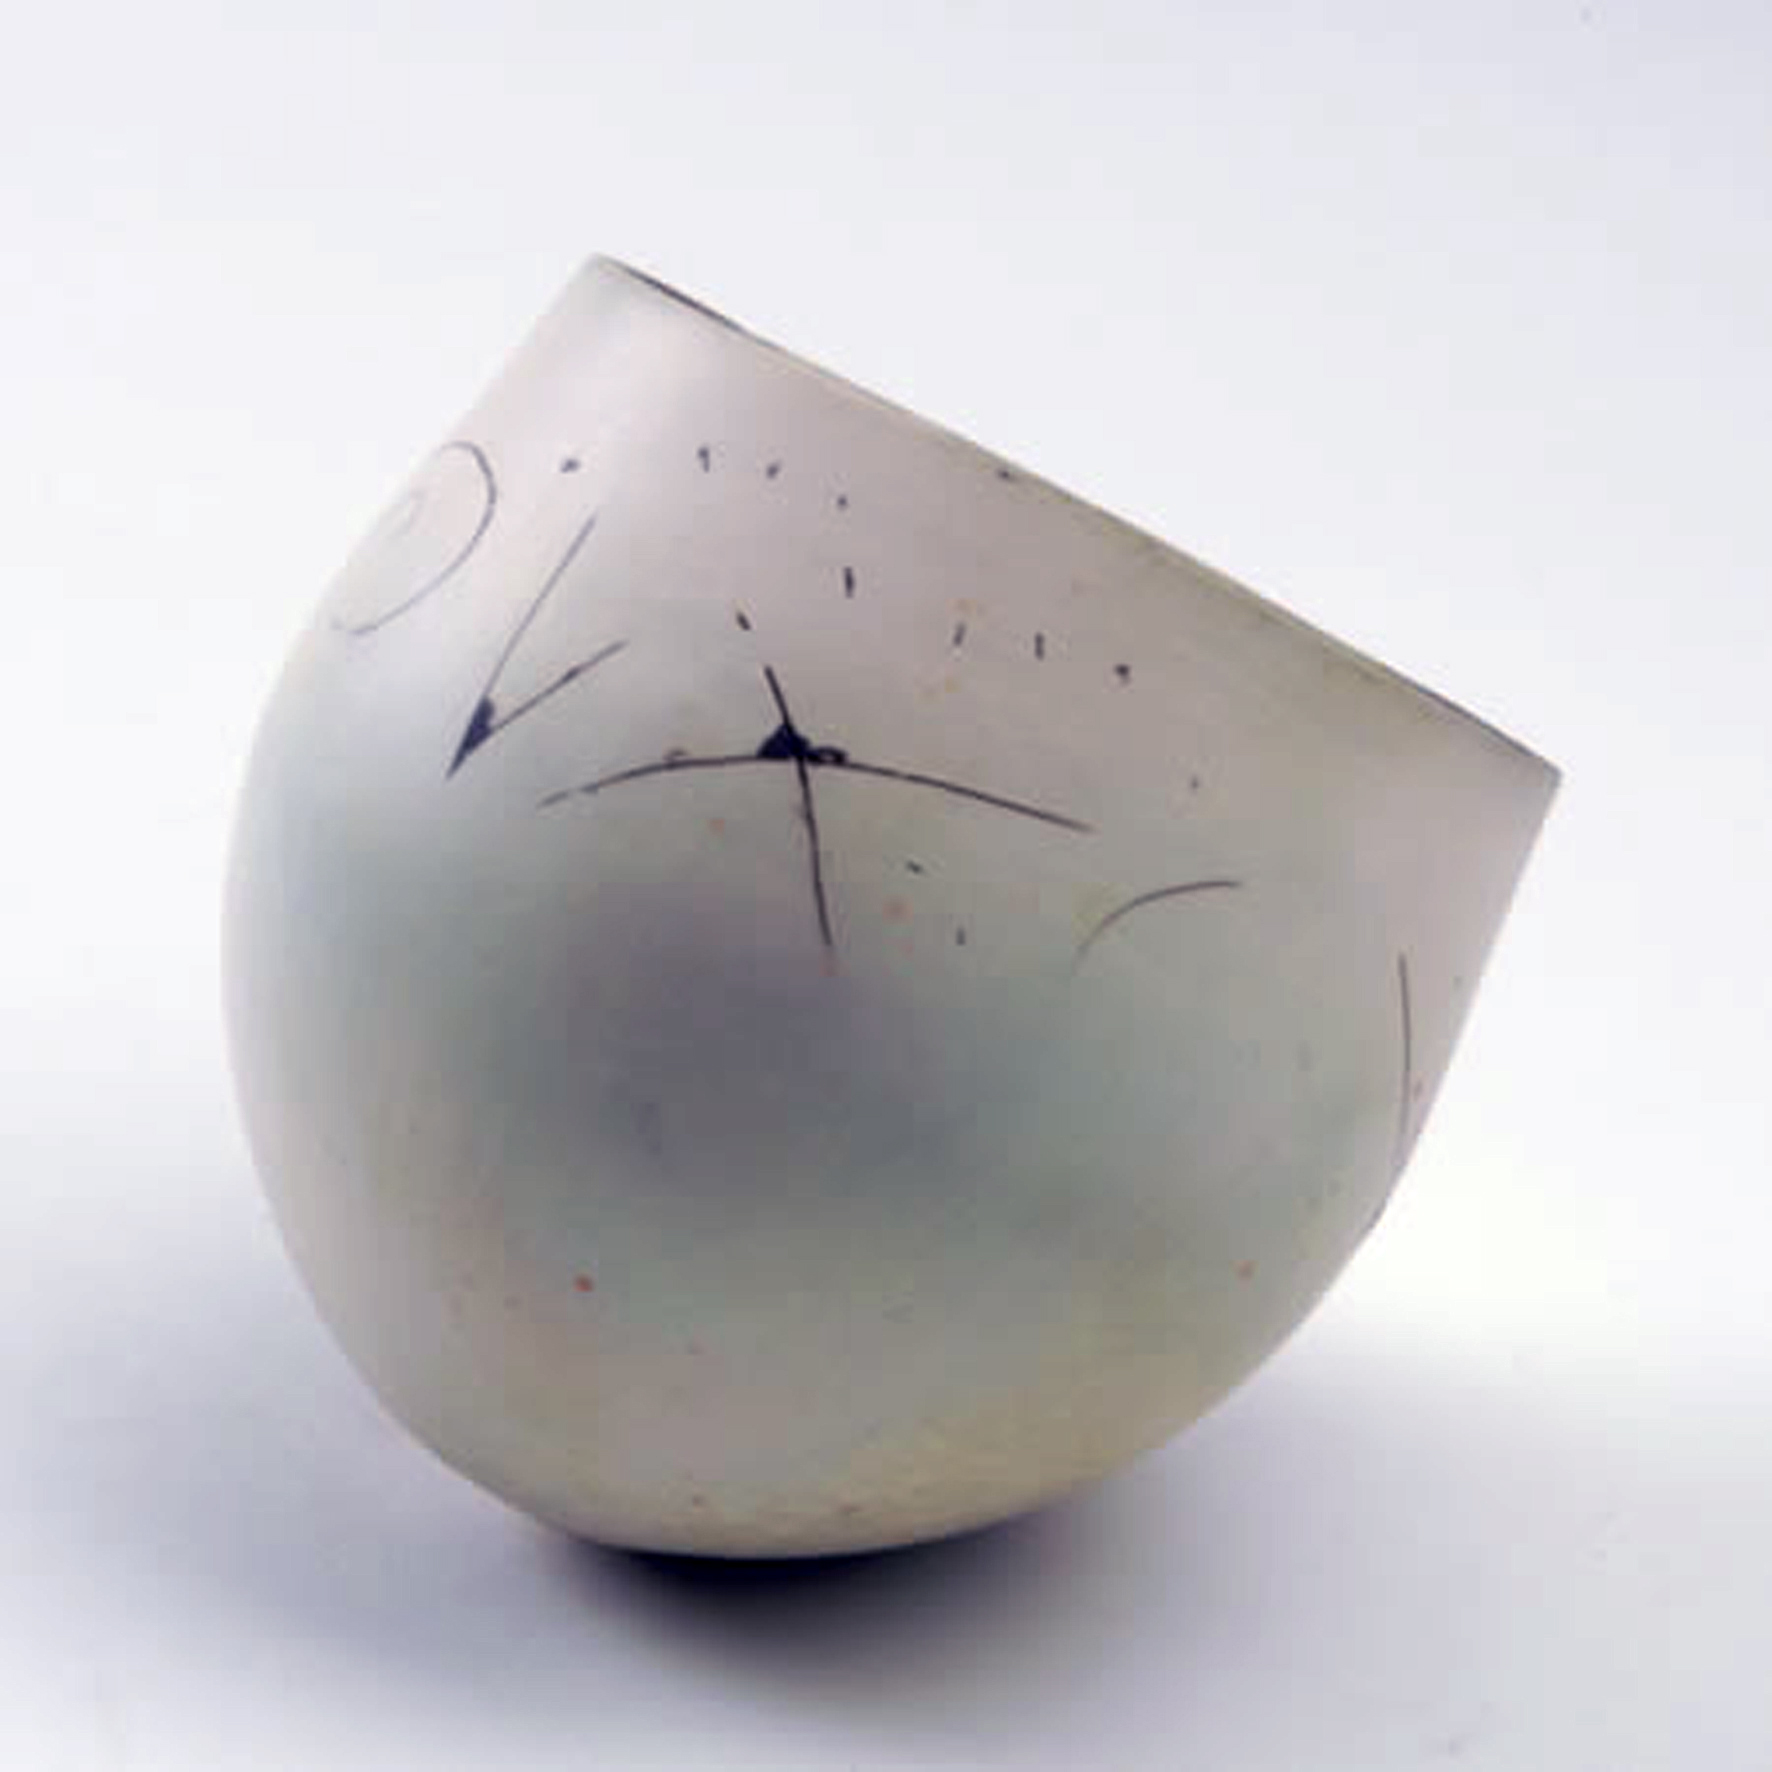 Elspeth Owen. Primitive markings, 1984. Pinch pot, sgraffito surface, approx. 5 x 5.5 x 5.5 in. Aberystwyth University Ceramic Collection and Archive.